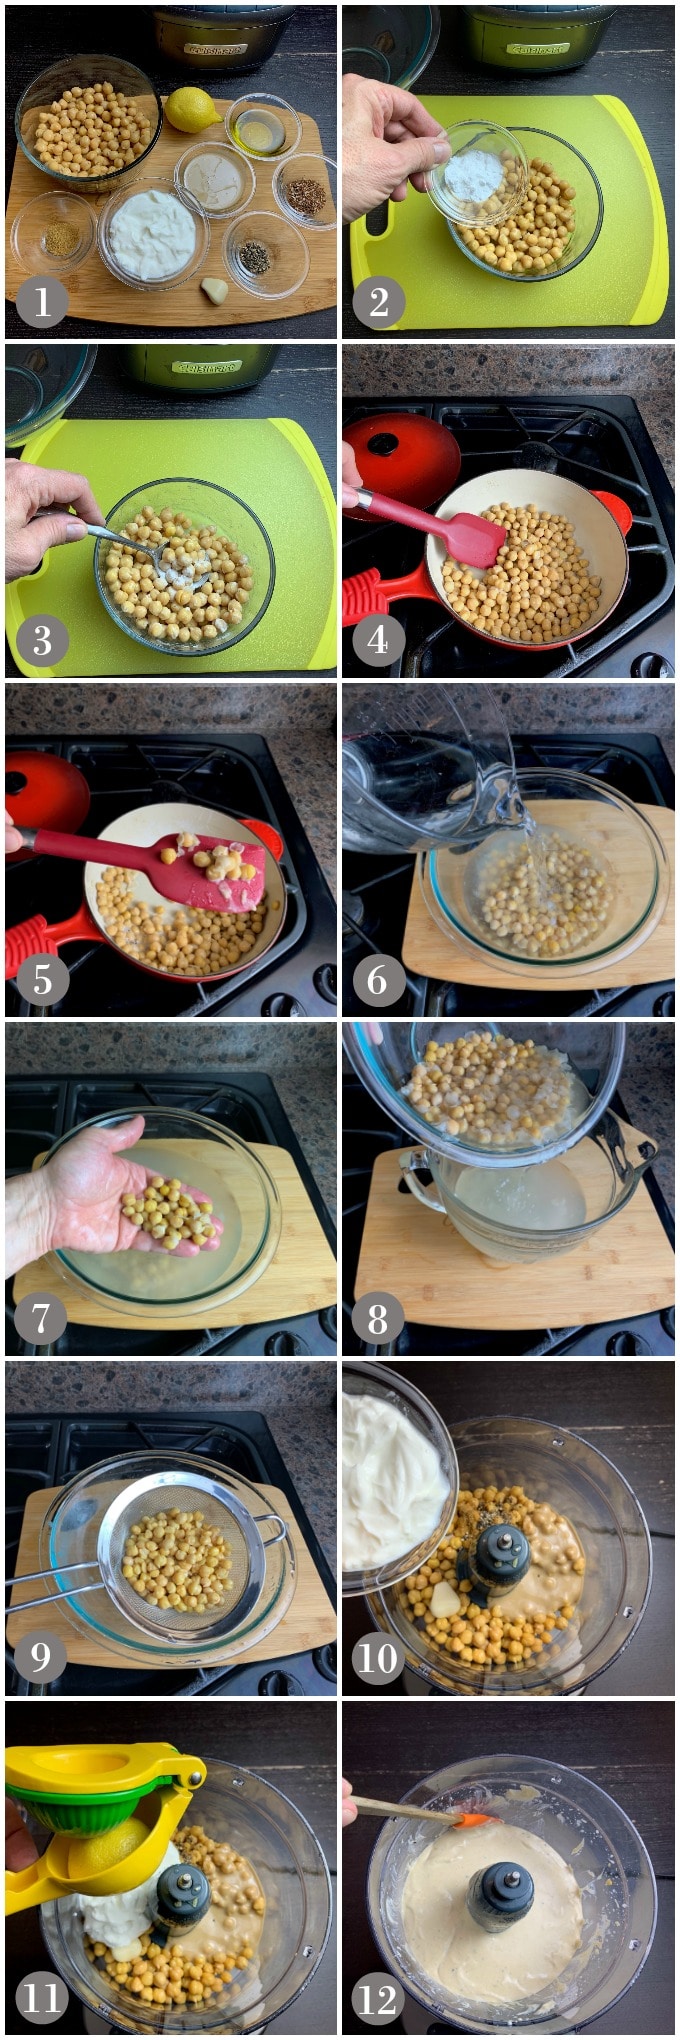 A collage of photos showing steps to make hummus in a food processor.